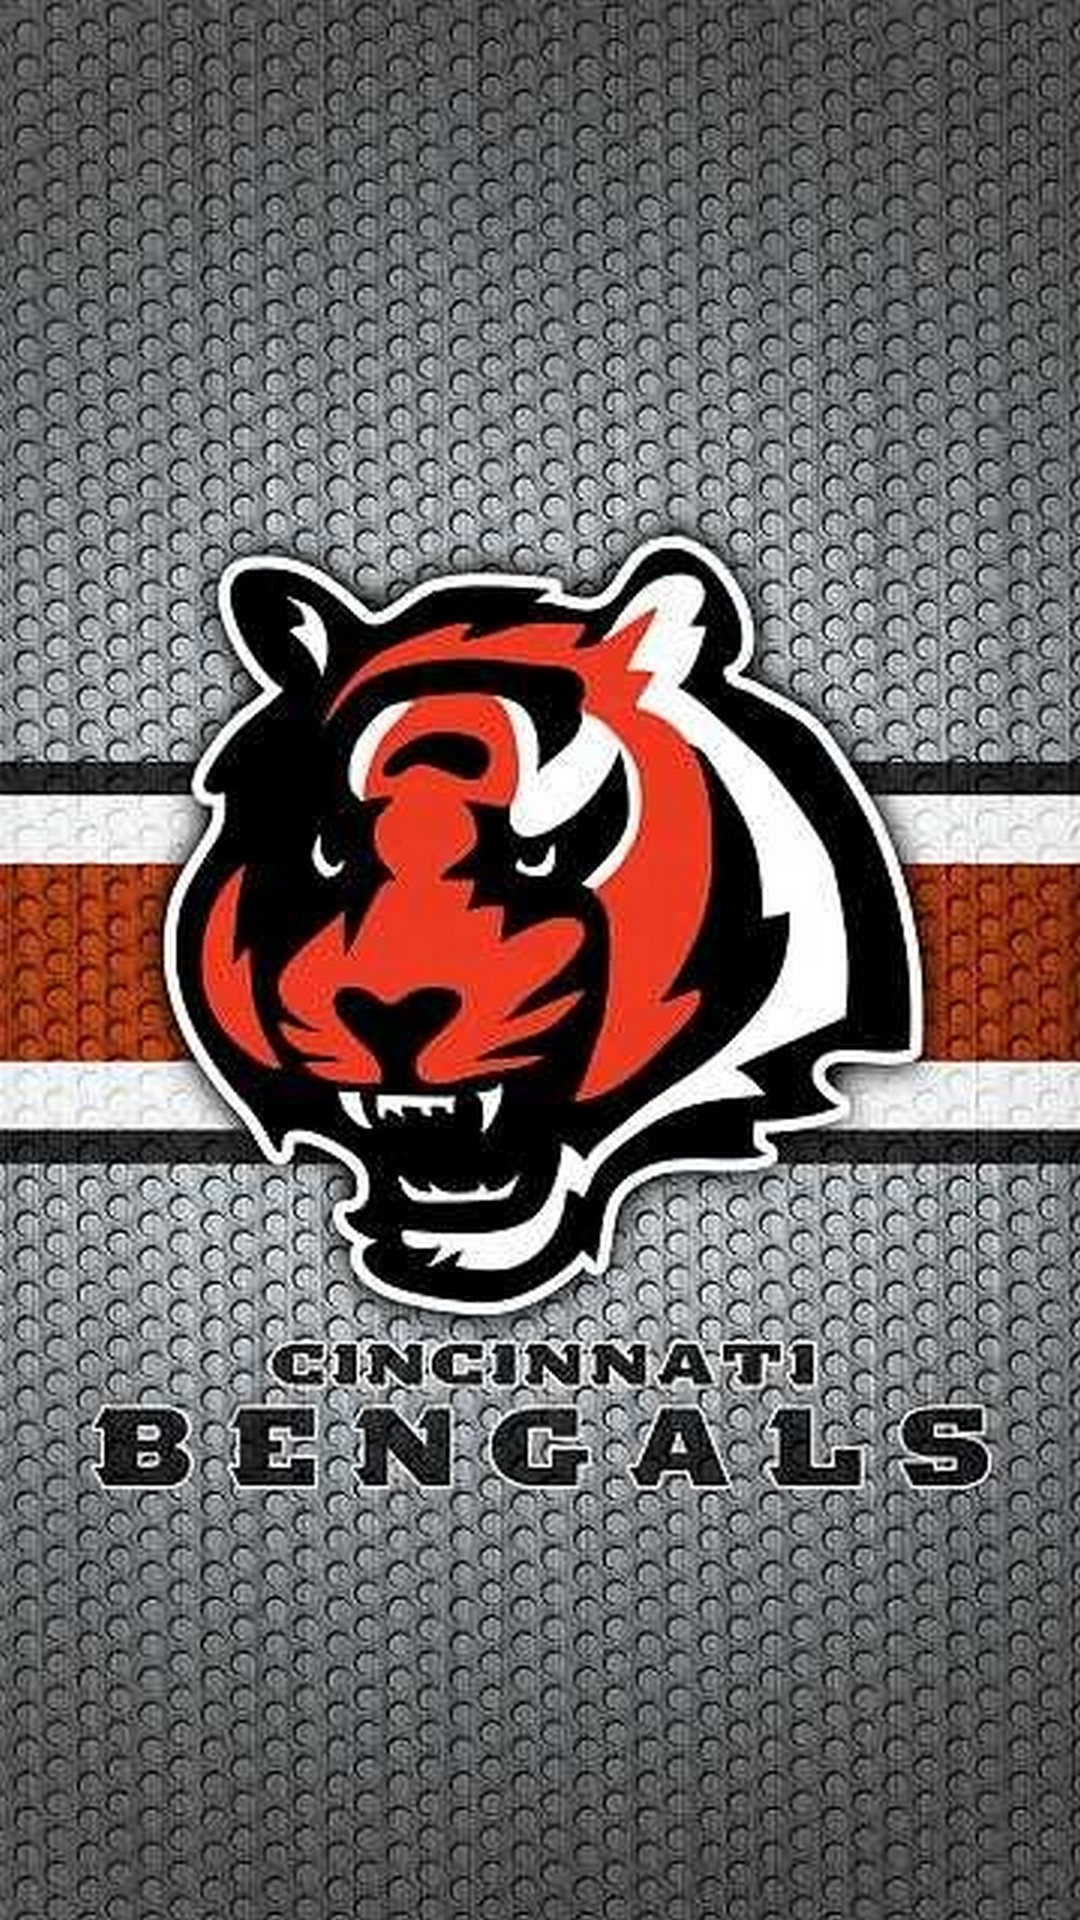 Cincinnati Bengals iPhone 7 Wallpaper With high-resolution 1080X1920 pixel. Download and set as wallpaper for Apple iPhone X, XS Max, XR, 8, 7, 6, SE, iPad, Android